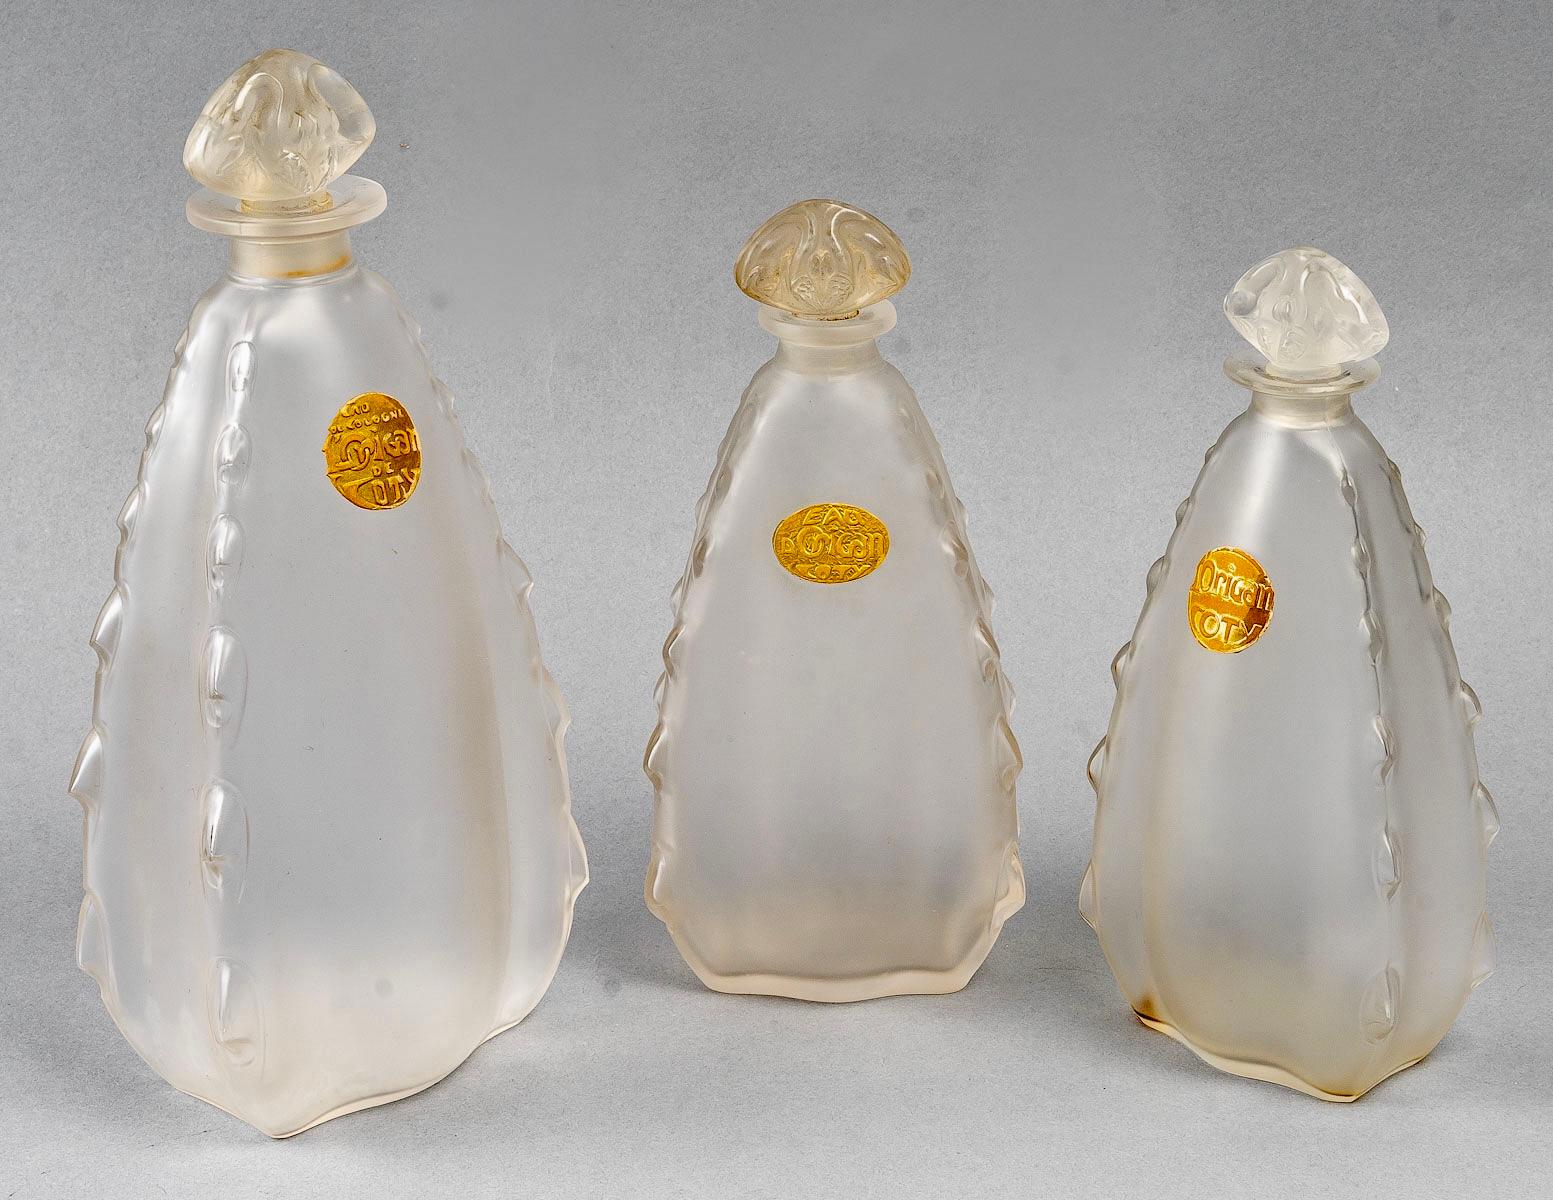 Set of 3 perfume bottles “L'Origan” made in frosted glass by René Lalique for Coty in 1912.
Signature molded under one bottle.

The 3 bottles are in perfect condition.

A 23.5 cm high bottle with the label “Eau de Cologne Origan de Coty”.
A 19